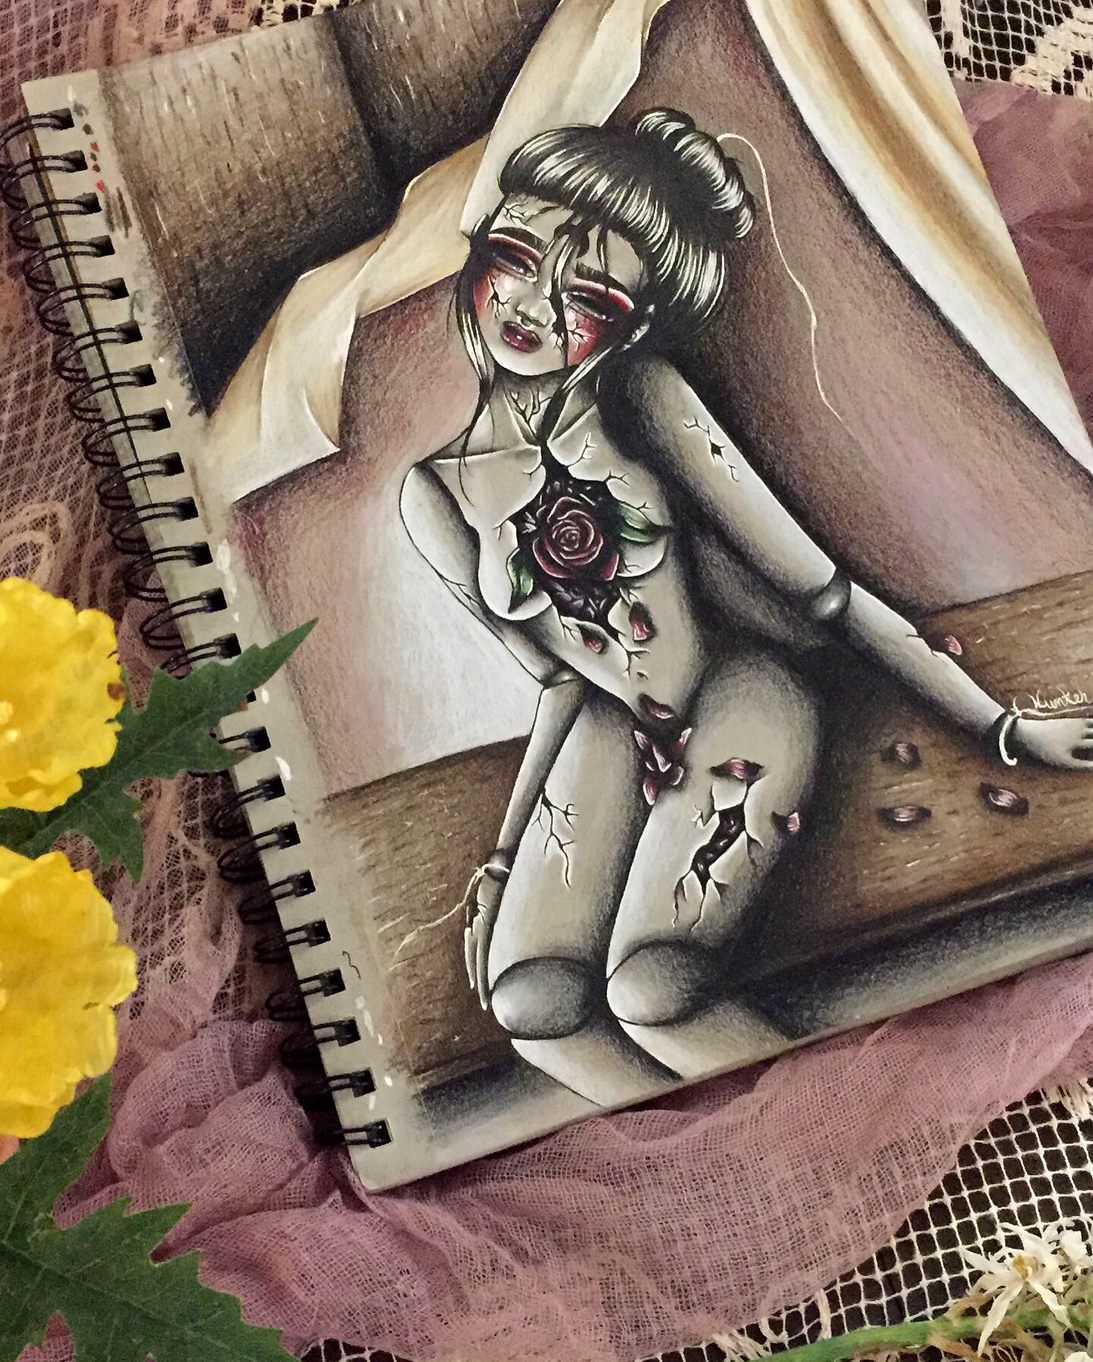 A illustration in a sketchbook of a broken marionette puppet, of mostly grays and blacks, sitting on a brown table. A large gaping wound in the doll's chest opens to reveal a rose of dark red petals, deep green leaves, and white highlights. Petals fall from the rose into the lap of the puppet. The doll's head is tilted toward the right, limp, and her black hair is tied in a loose bun with strands falling in front of her face, slightly covering the upside-down crescent moon symbol on her forehead. There are broken strings hanging from the wrists and head of the marionette. The sketchbook is pictured on a background of light pink and white lace fabrics, with a pop of bright yellow flowers with green leaves on the left side.